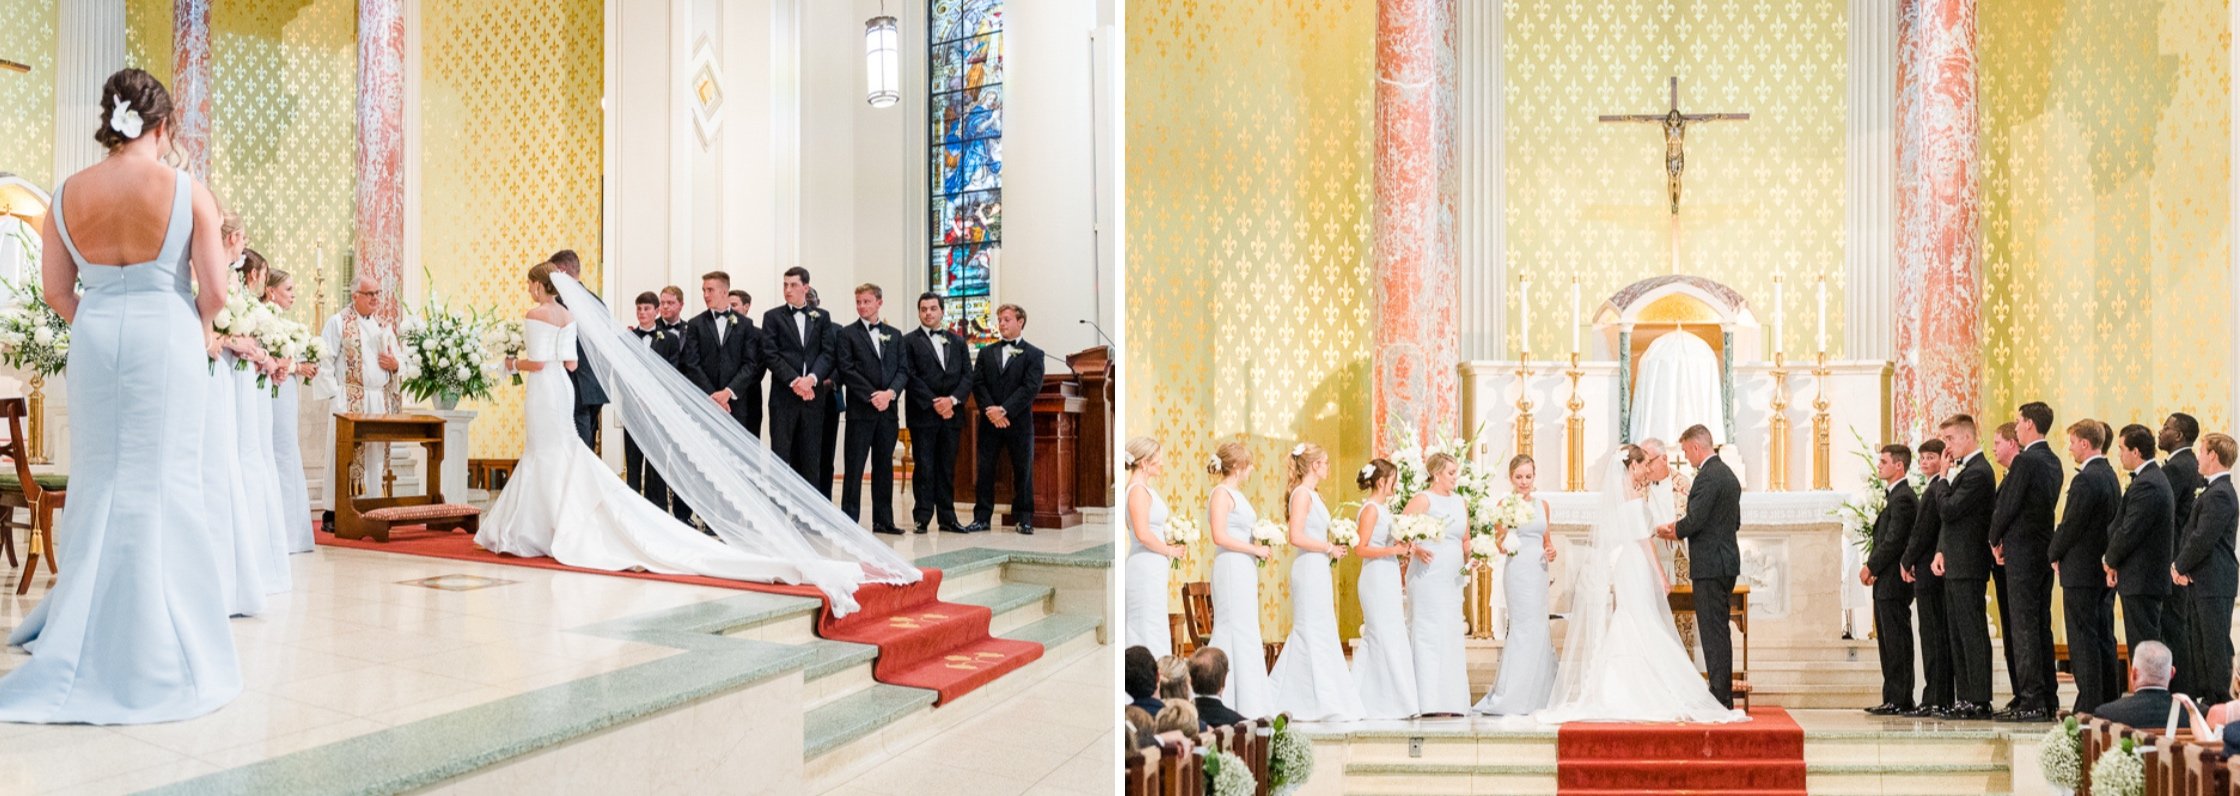 Cathedral Basilica of the Immaculate Conception Wedding Ceremony | Bragg Mitchell Mansion Wedding Reception | Mobile Alabama Wedding Photographer | Kristen Marcus Photography